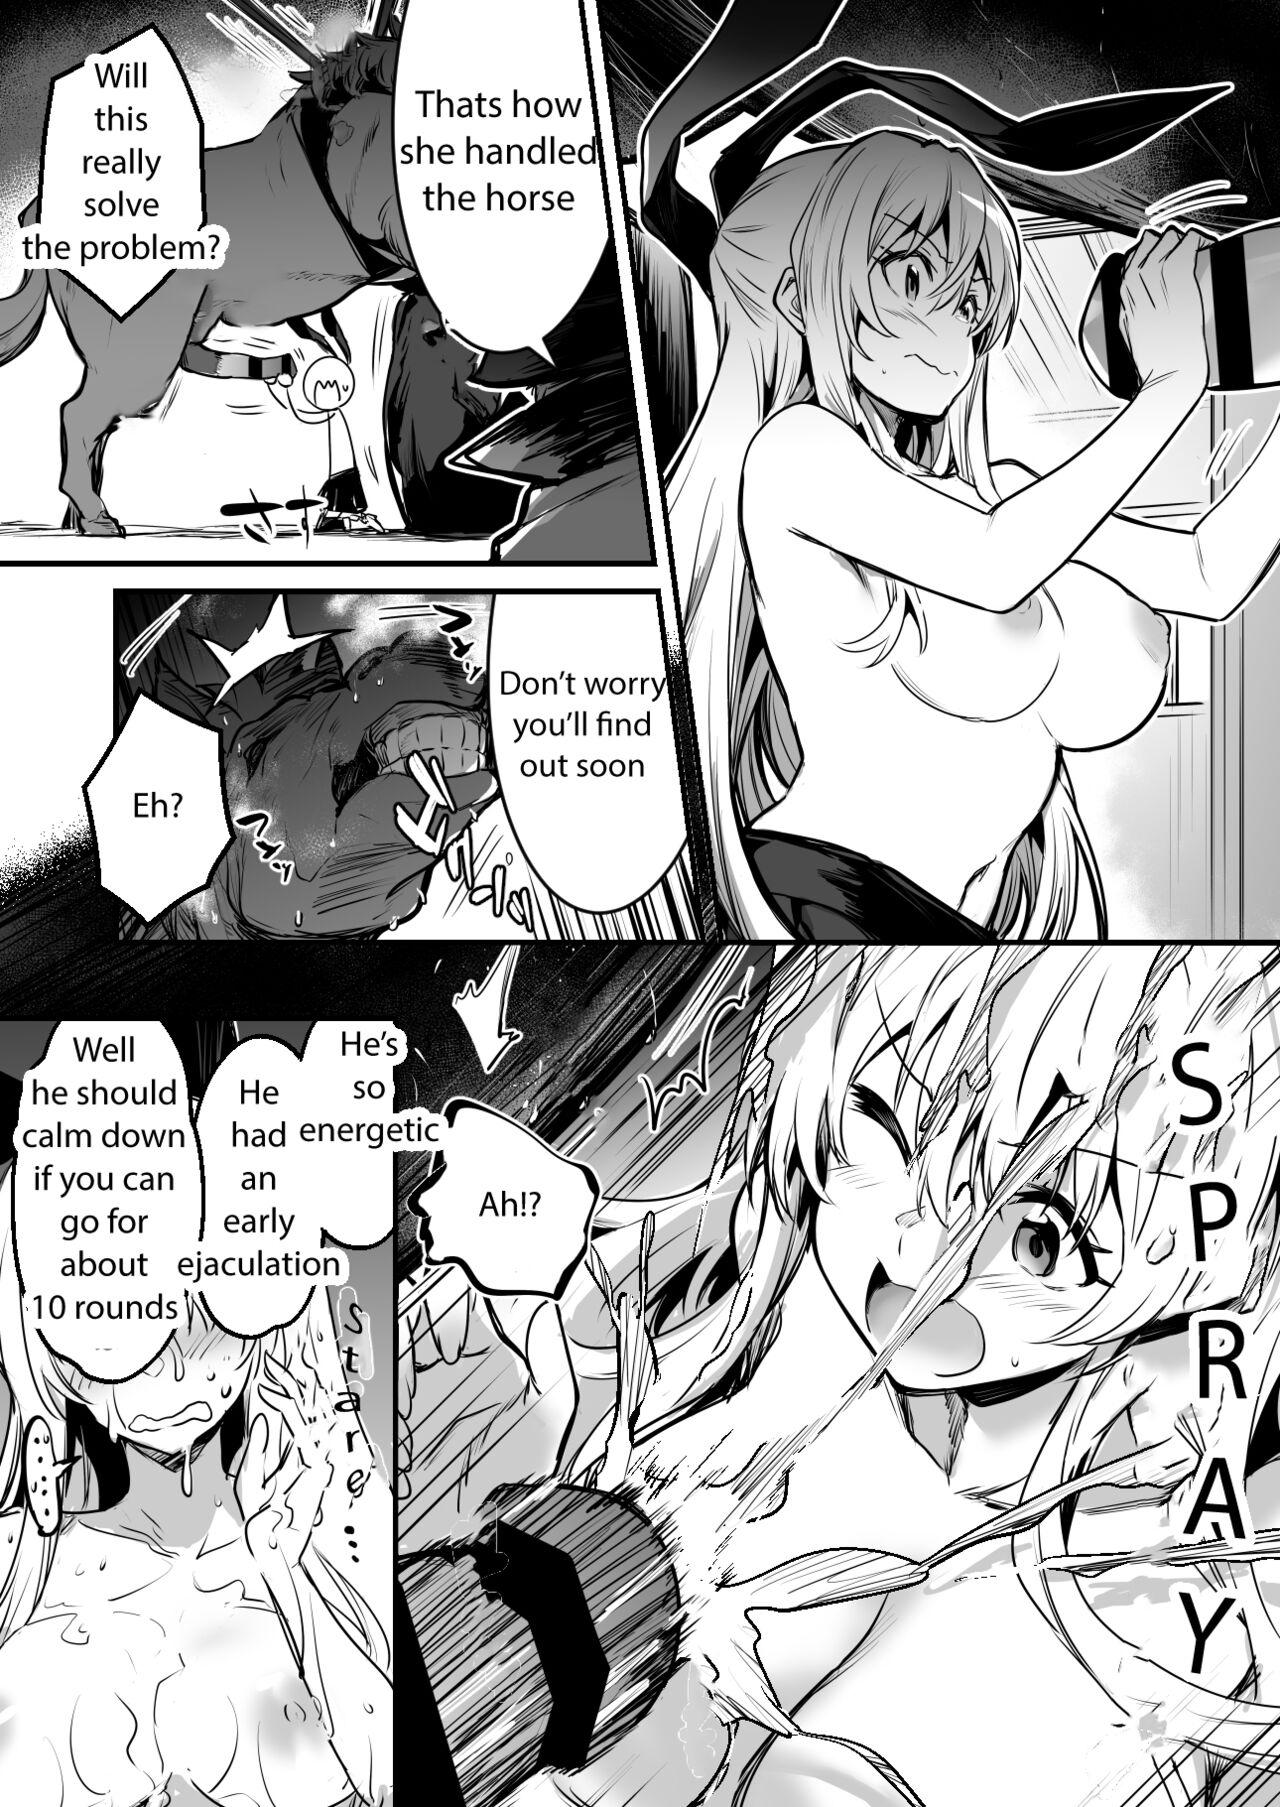 Chupa Adventure-chan helps the lustful horse cum so he'll carry her away Ejaculation - Page 3